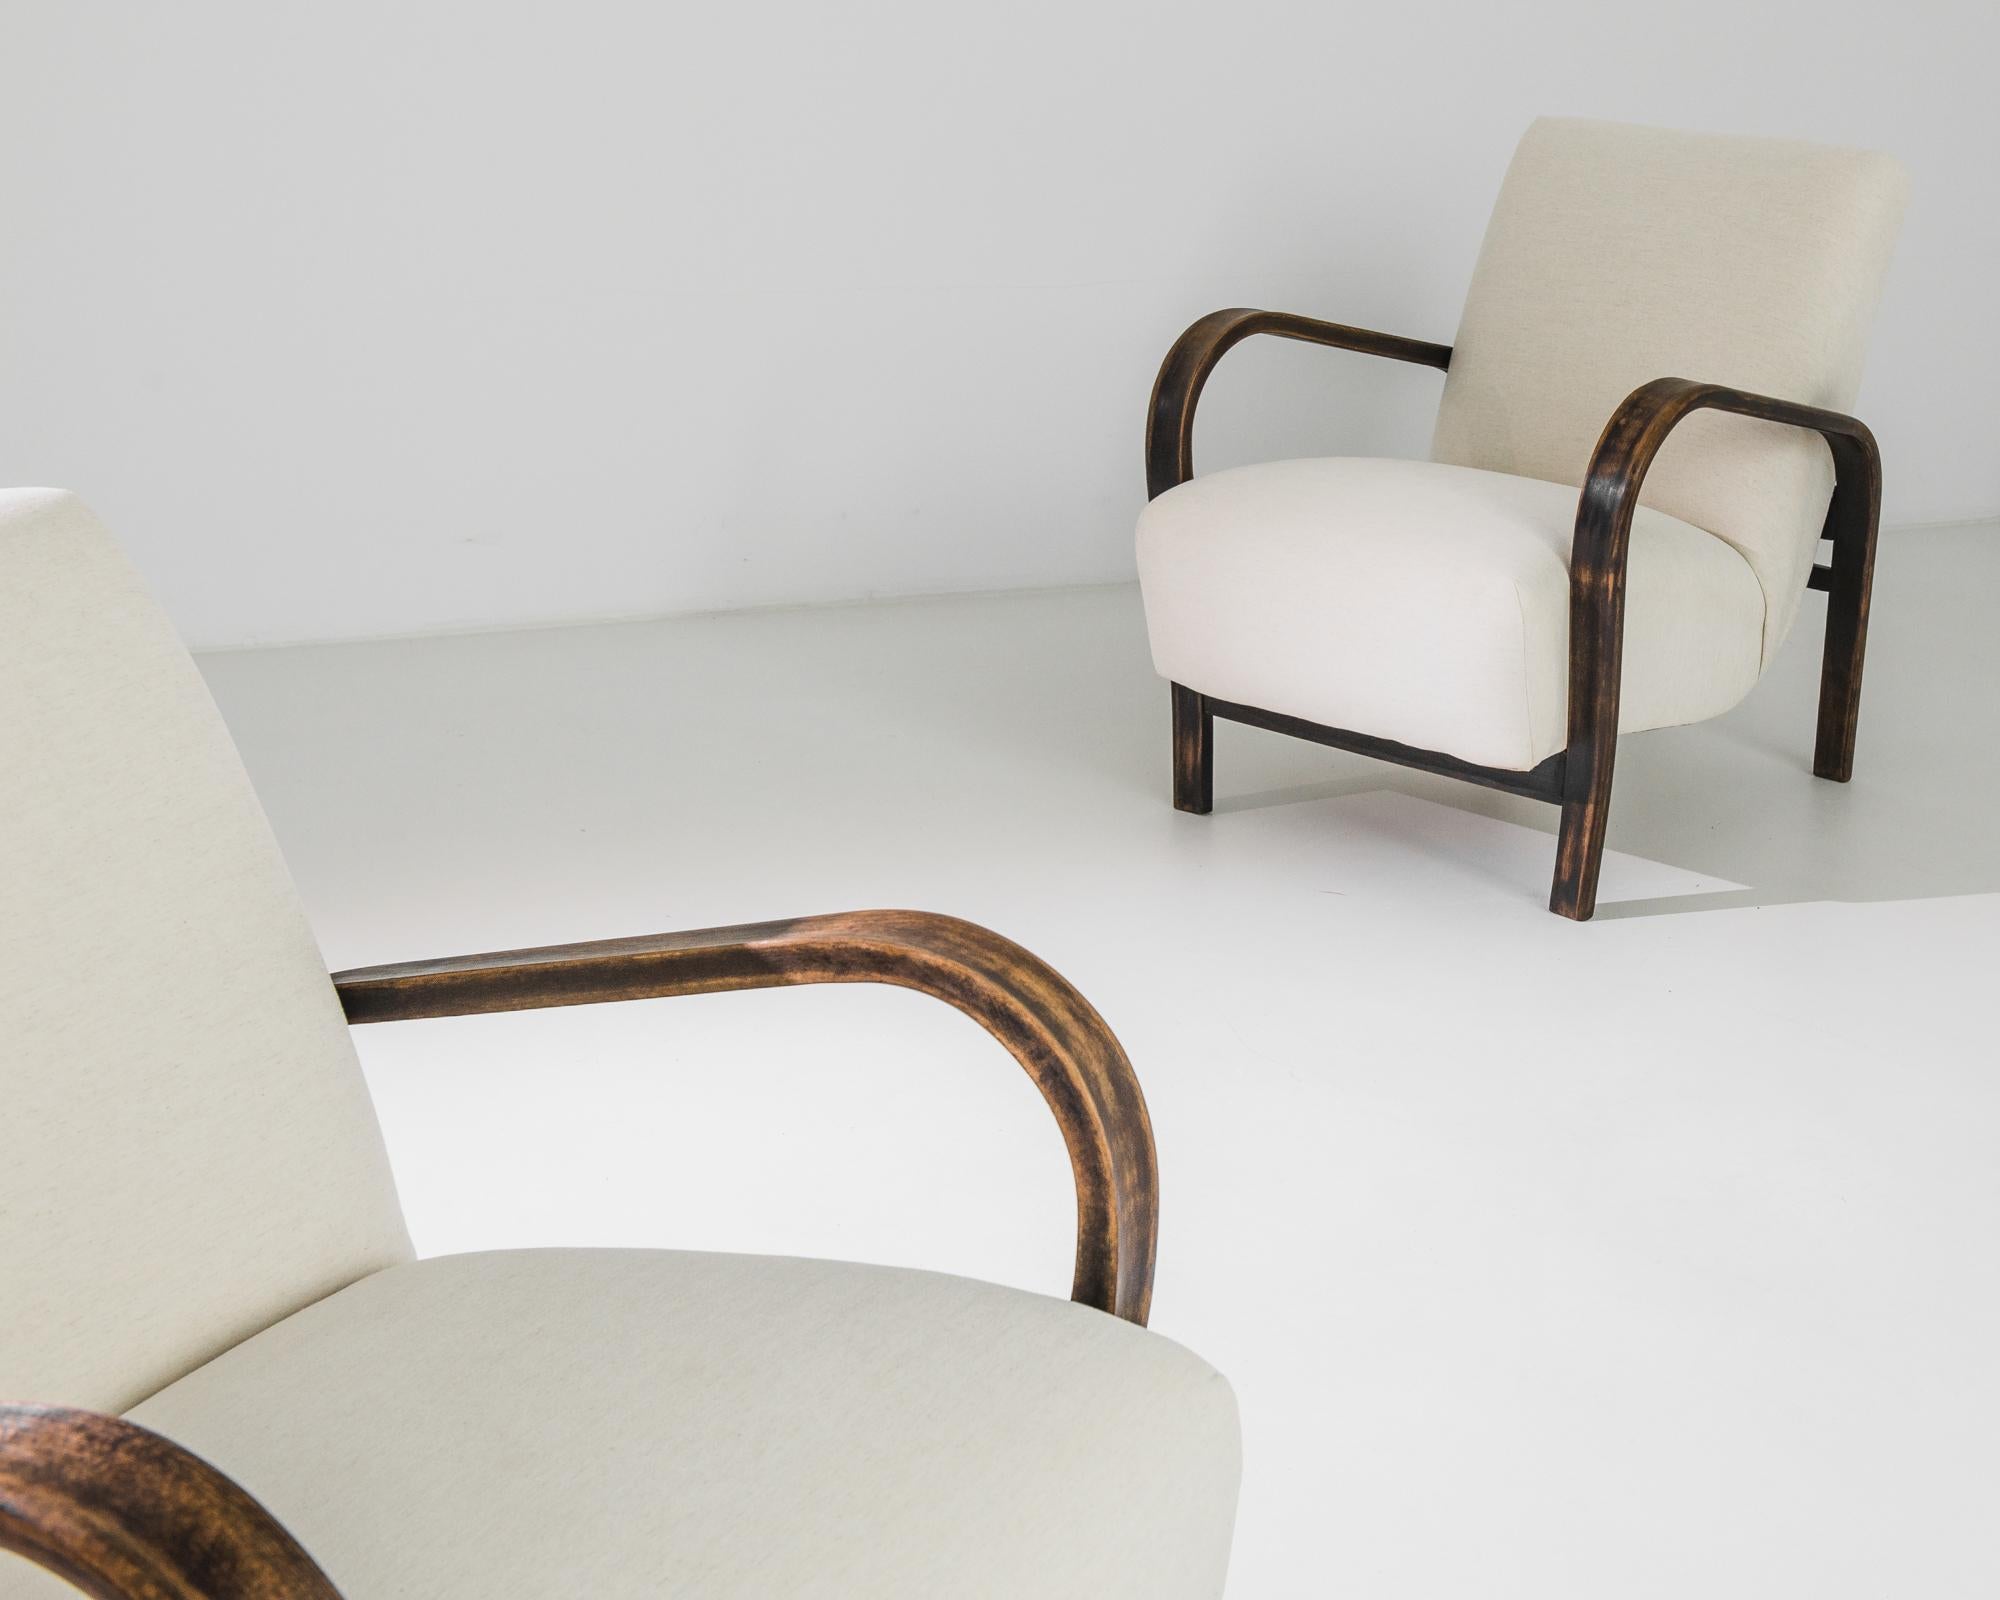 A pair of upholstered armchairs by Karel Kozelka & Antonin Kropácek, produced in Czechia circa 1960. A pair of chairs, formed from soft curves in cream and brown. This award winning design from the Czech design duo is a symphony of bentwood and